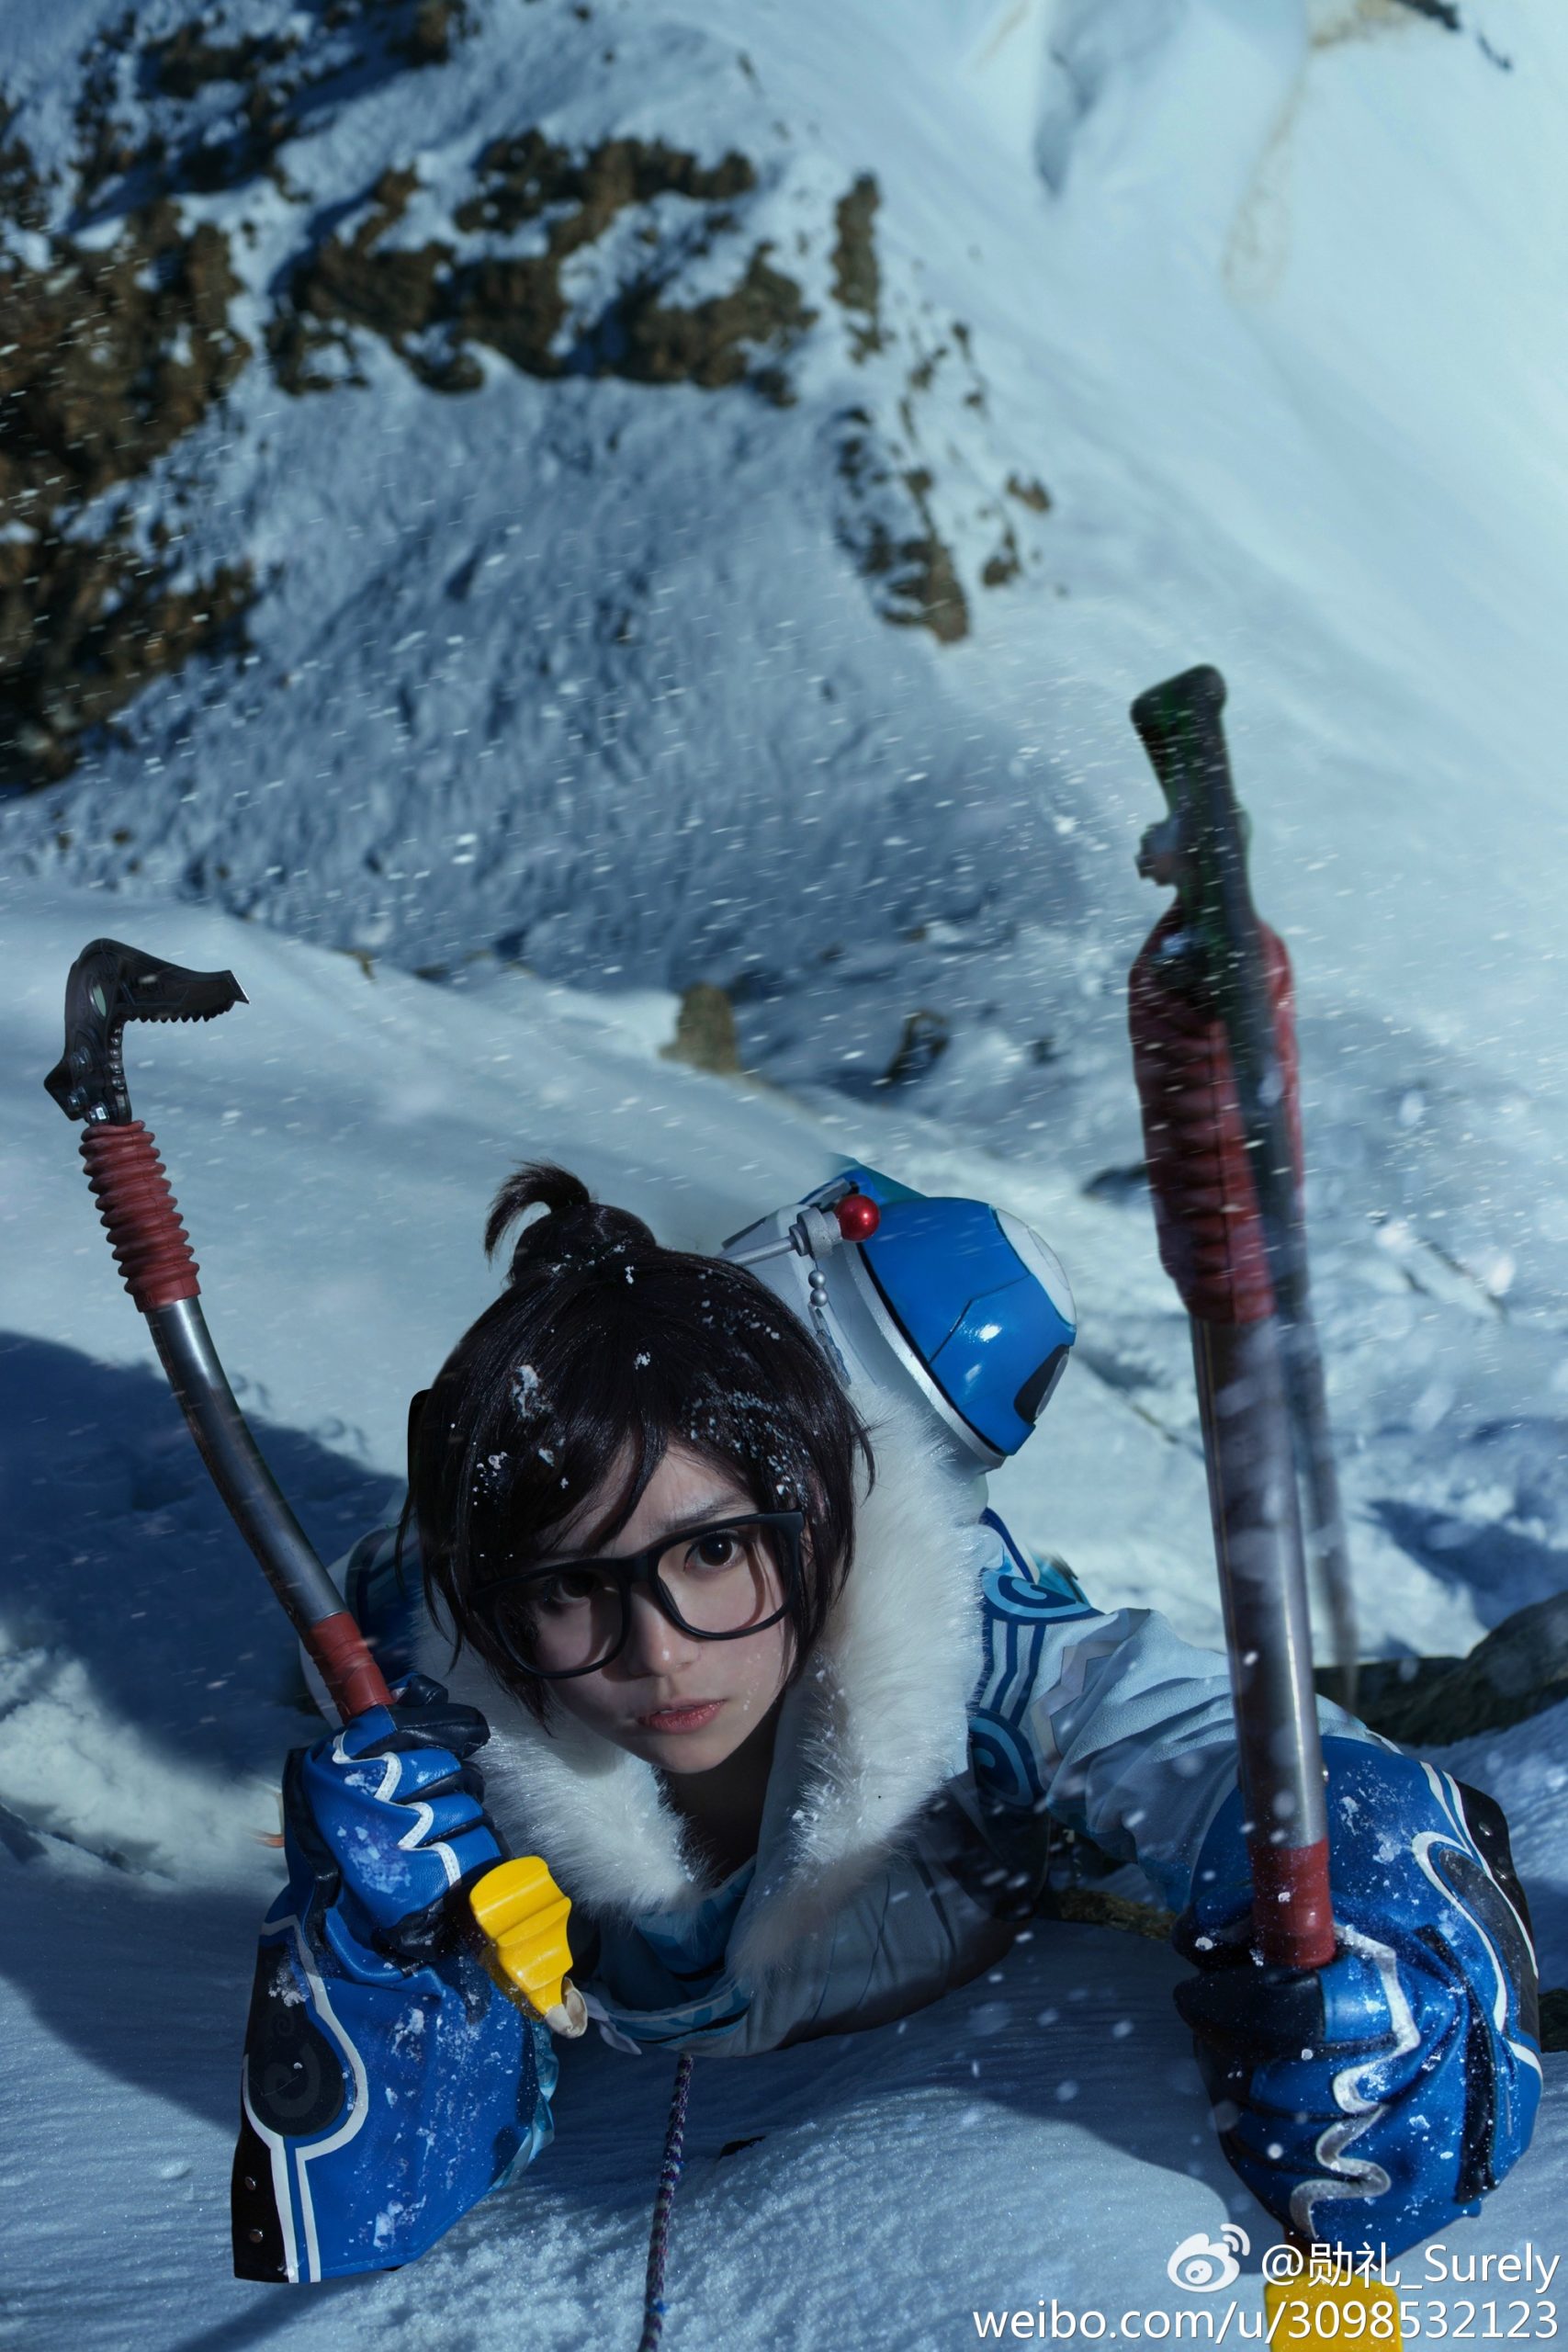 Chinese Mei Cosplay Has Plenty Of Chill